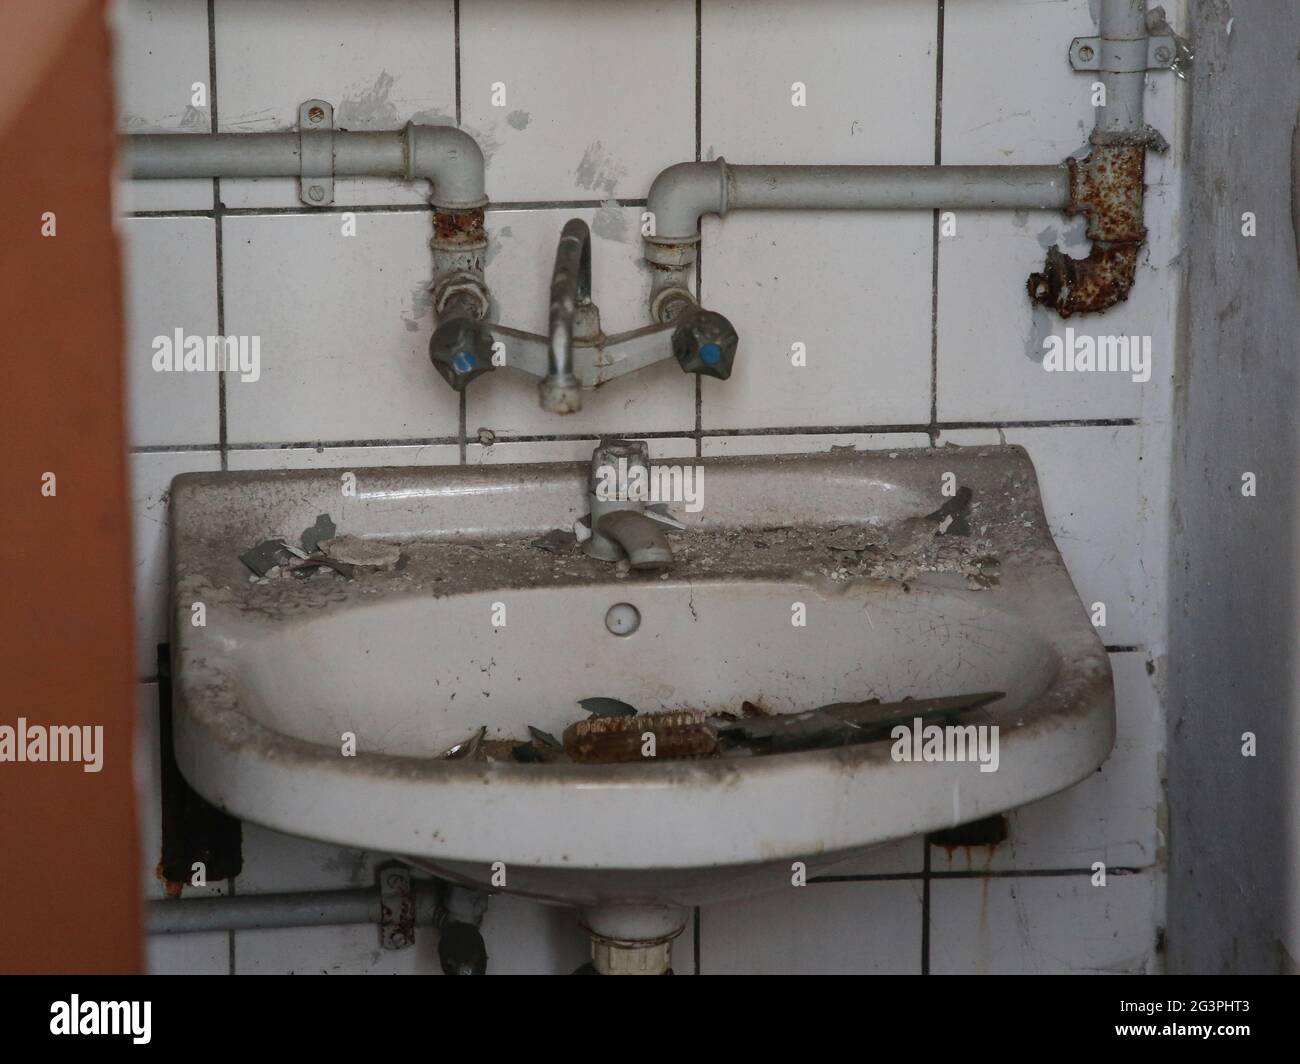 Dirty sink with water connection Stock Photo